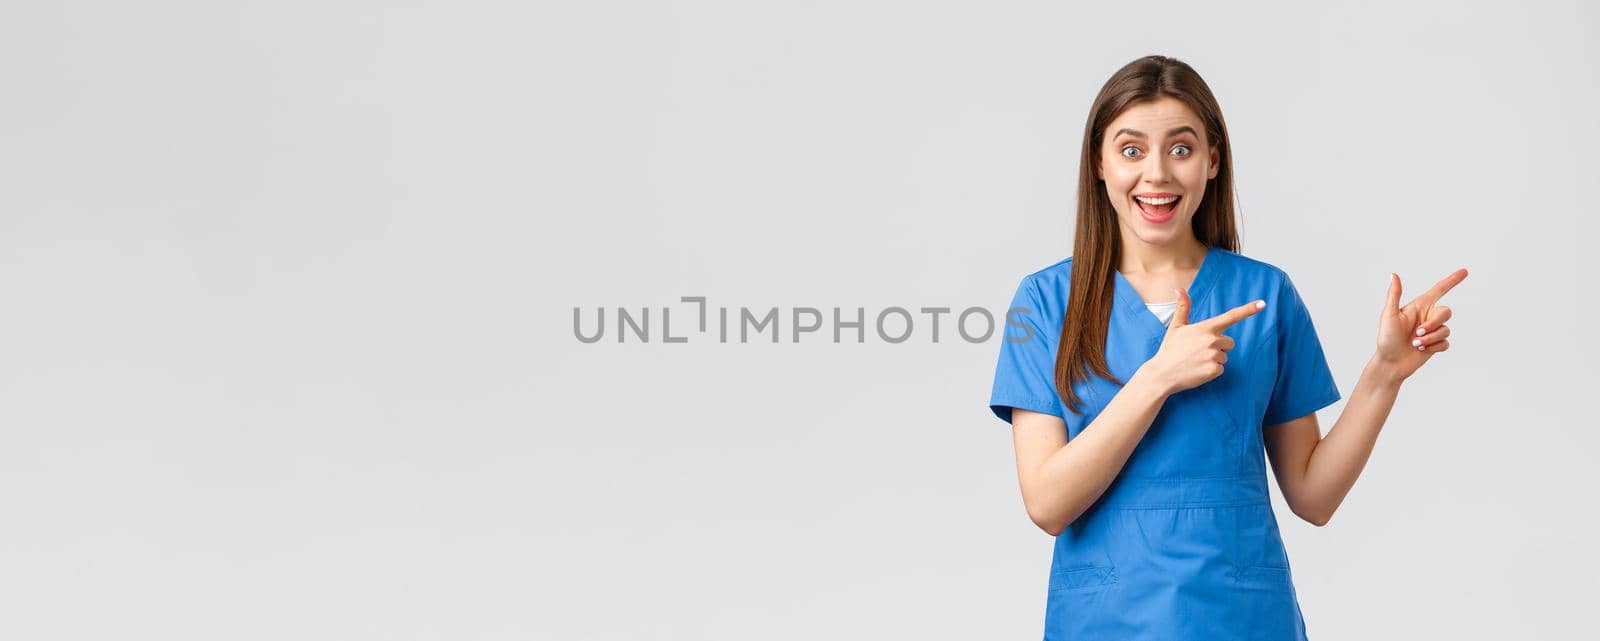 Healthcare workers, prevent virus, insurance and medicine concept. Excited happy female nurse or doctor in blue scrubs pointing fingers right, look amused, inform about promo or good news.